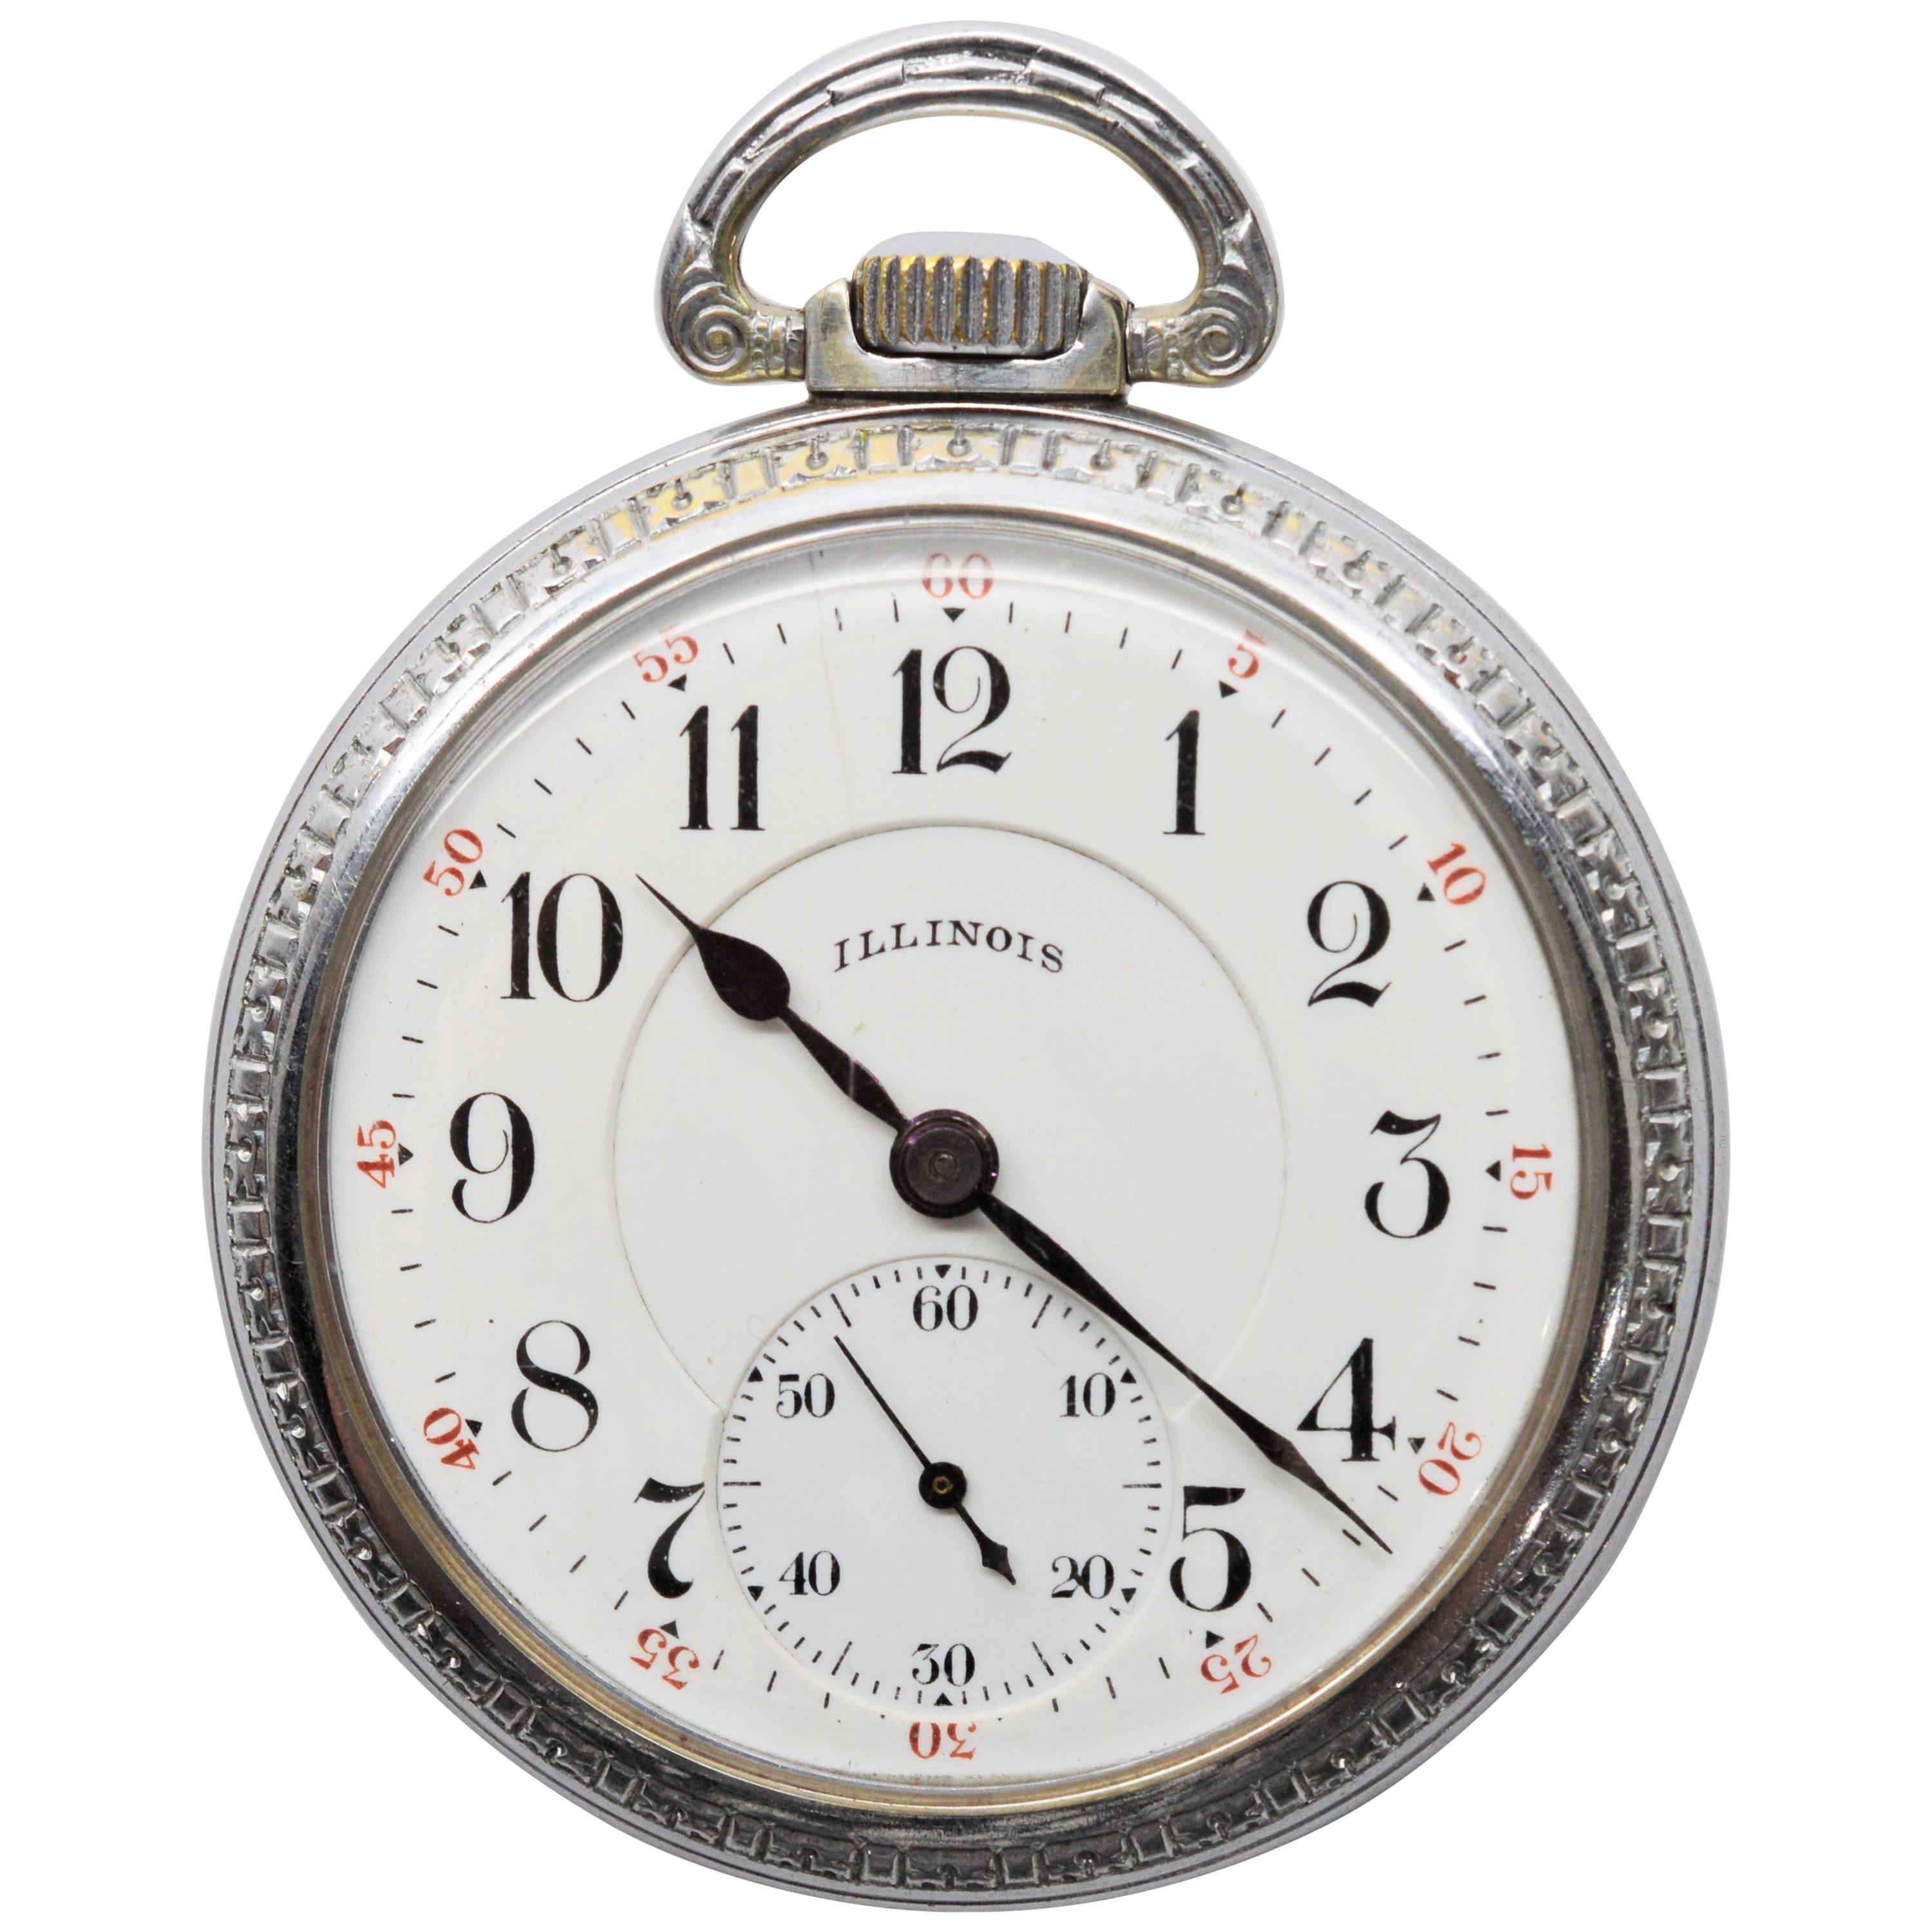 Illinois Steel Pocket Watch with Display Back